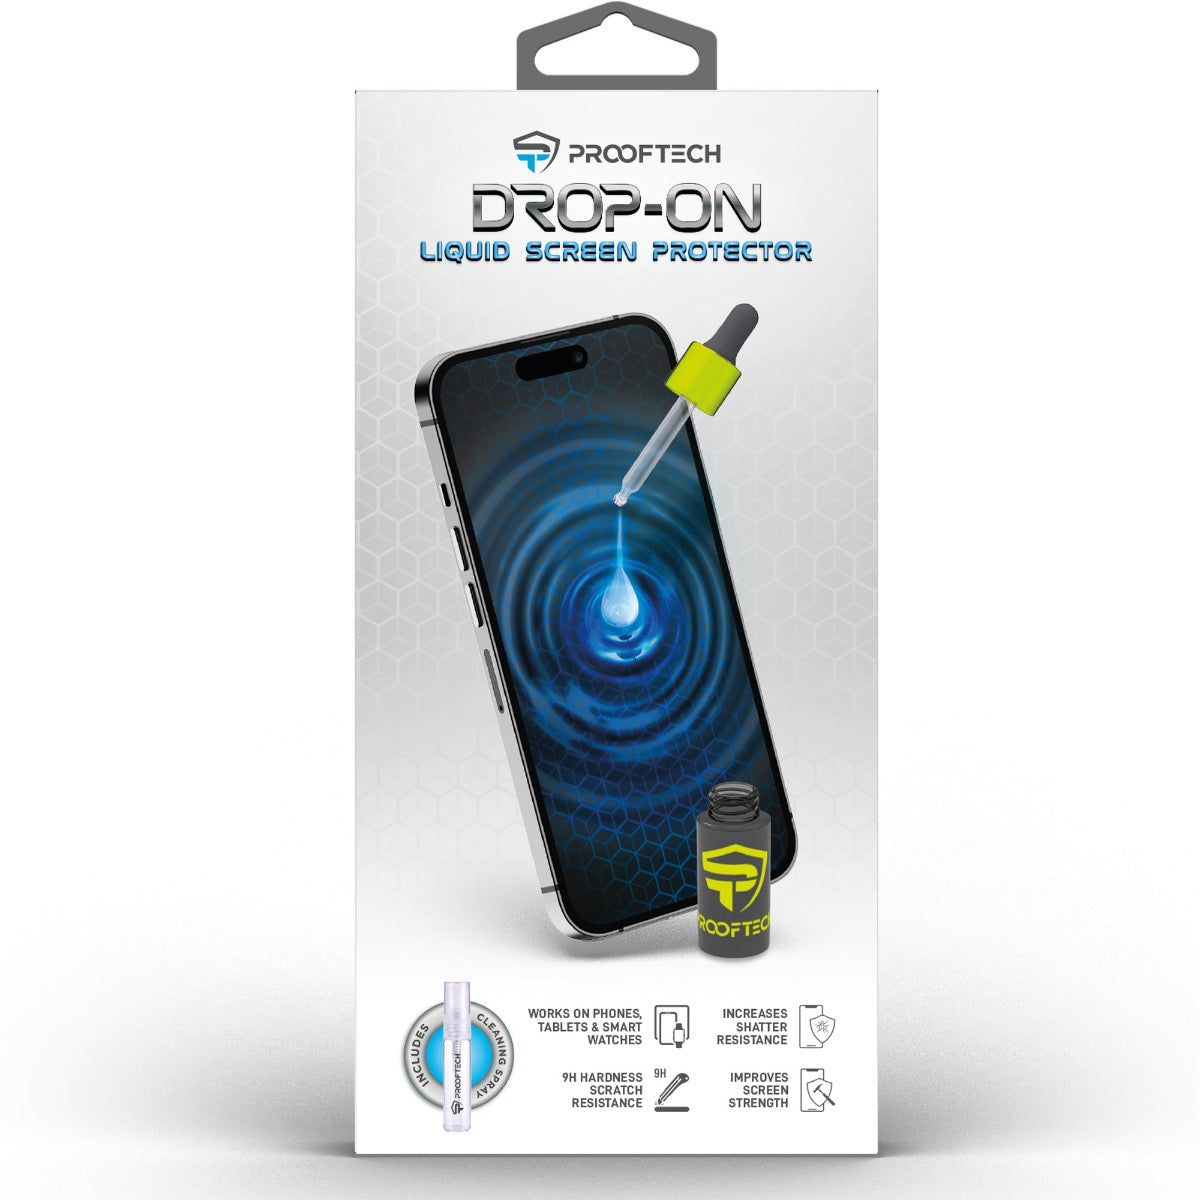 DROP ON Liquid Glass Screen Protector Wipe On Nano Protection for All Devices